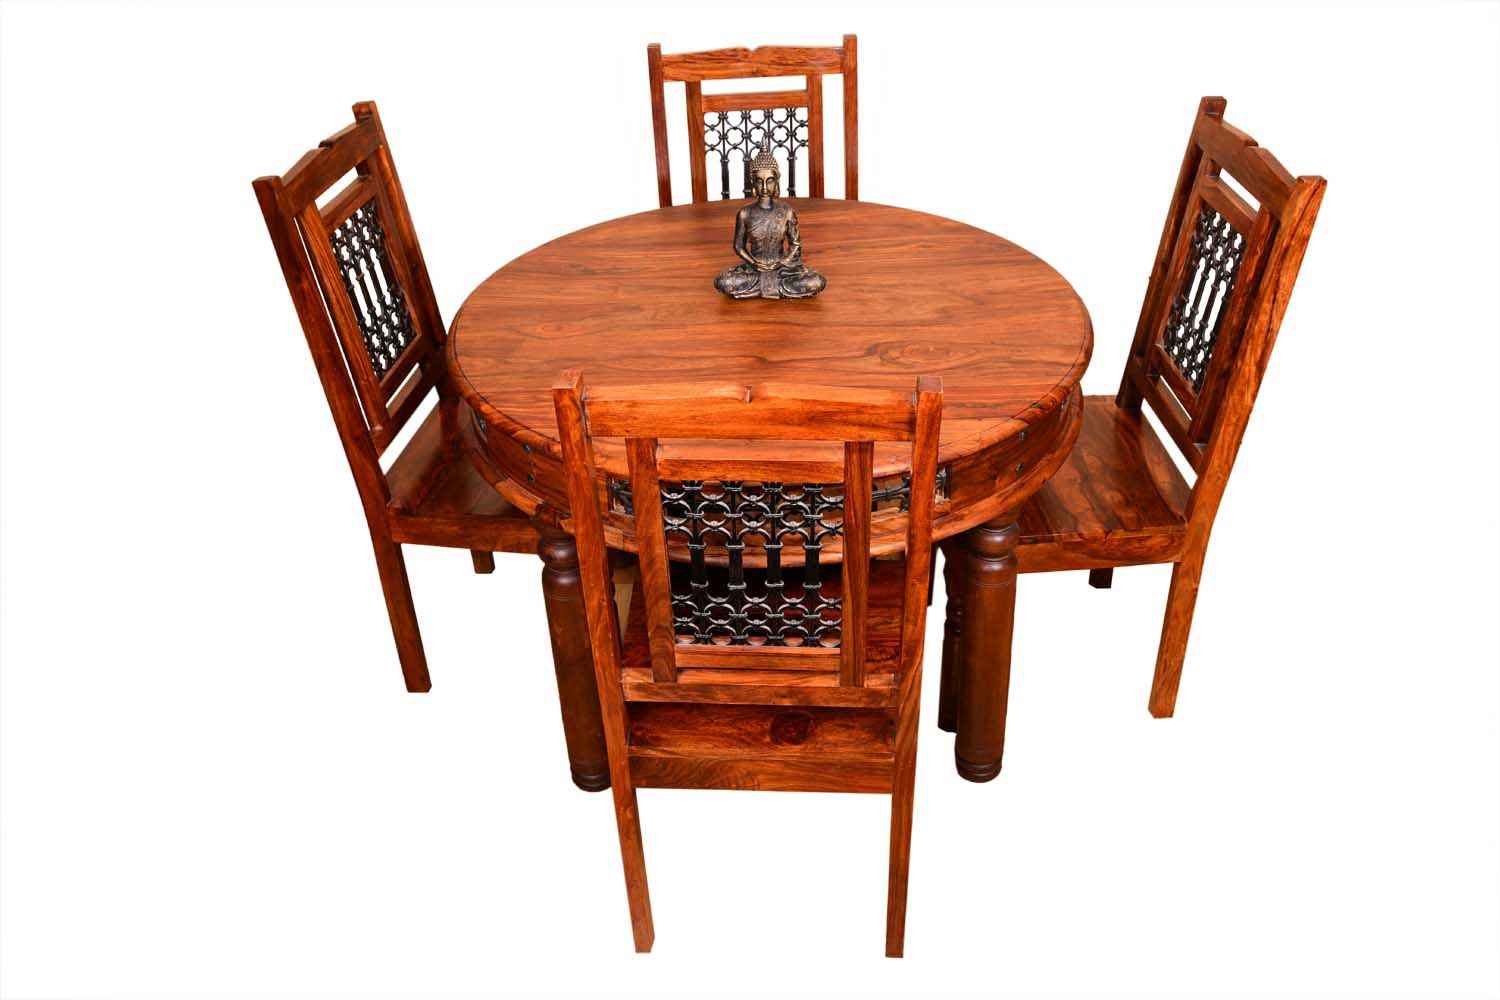 4 seat dining room table